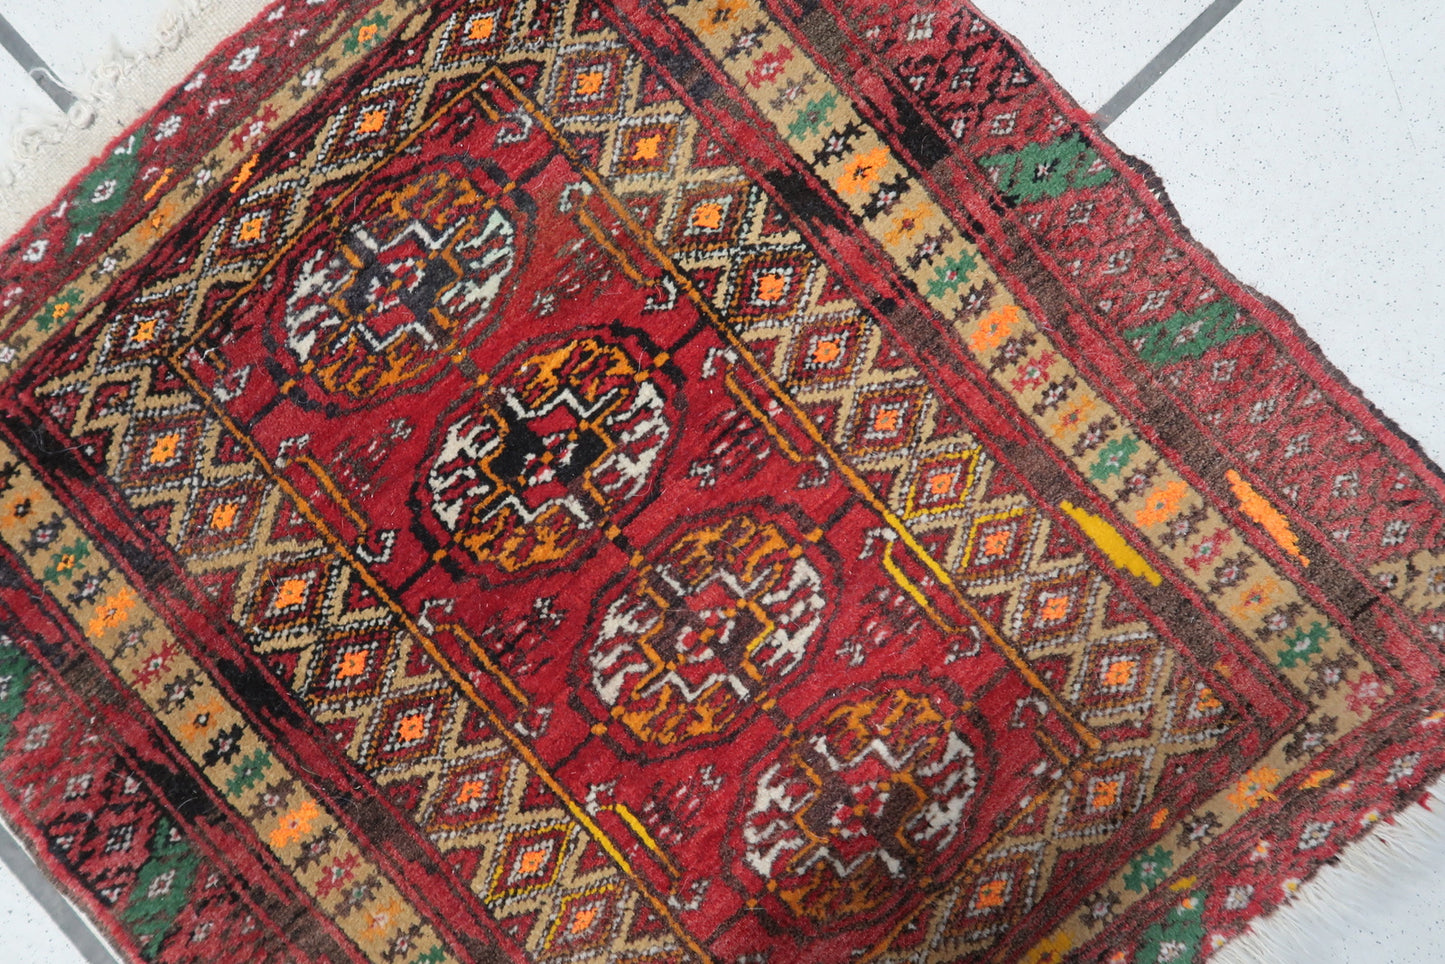 Detailed view of the red background color on the vintage Afghan Ersari mat